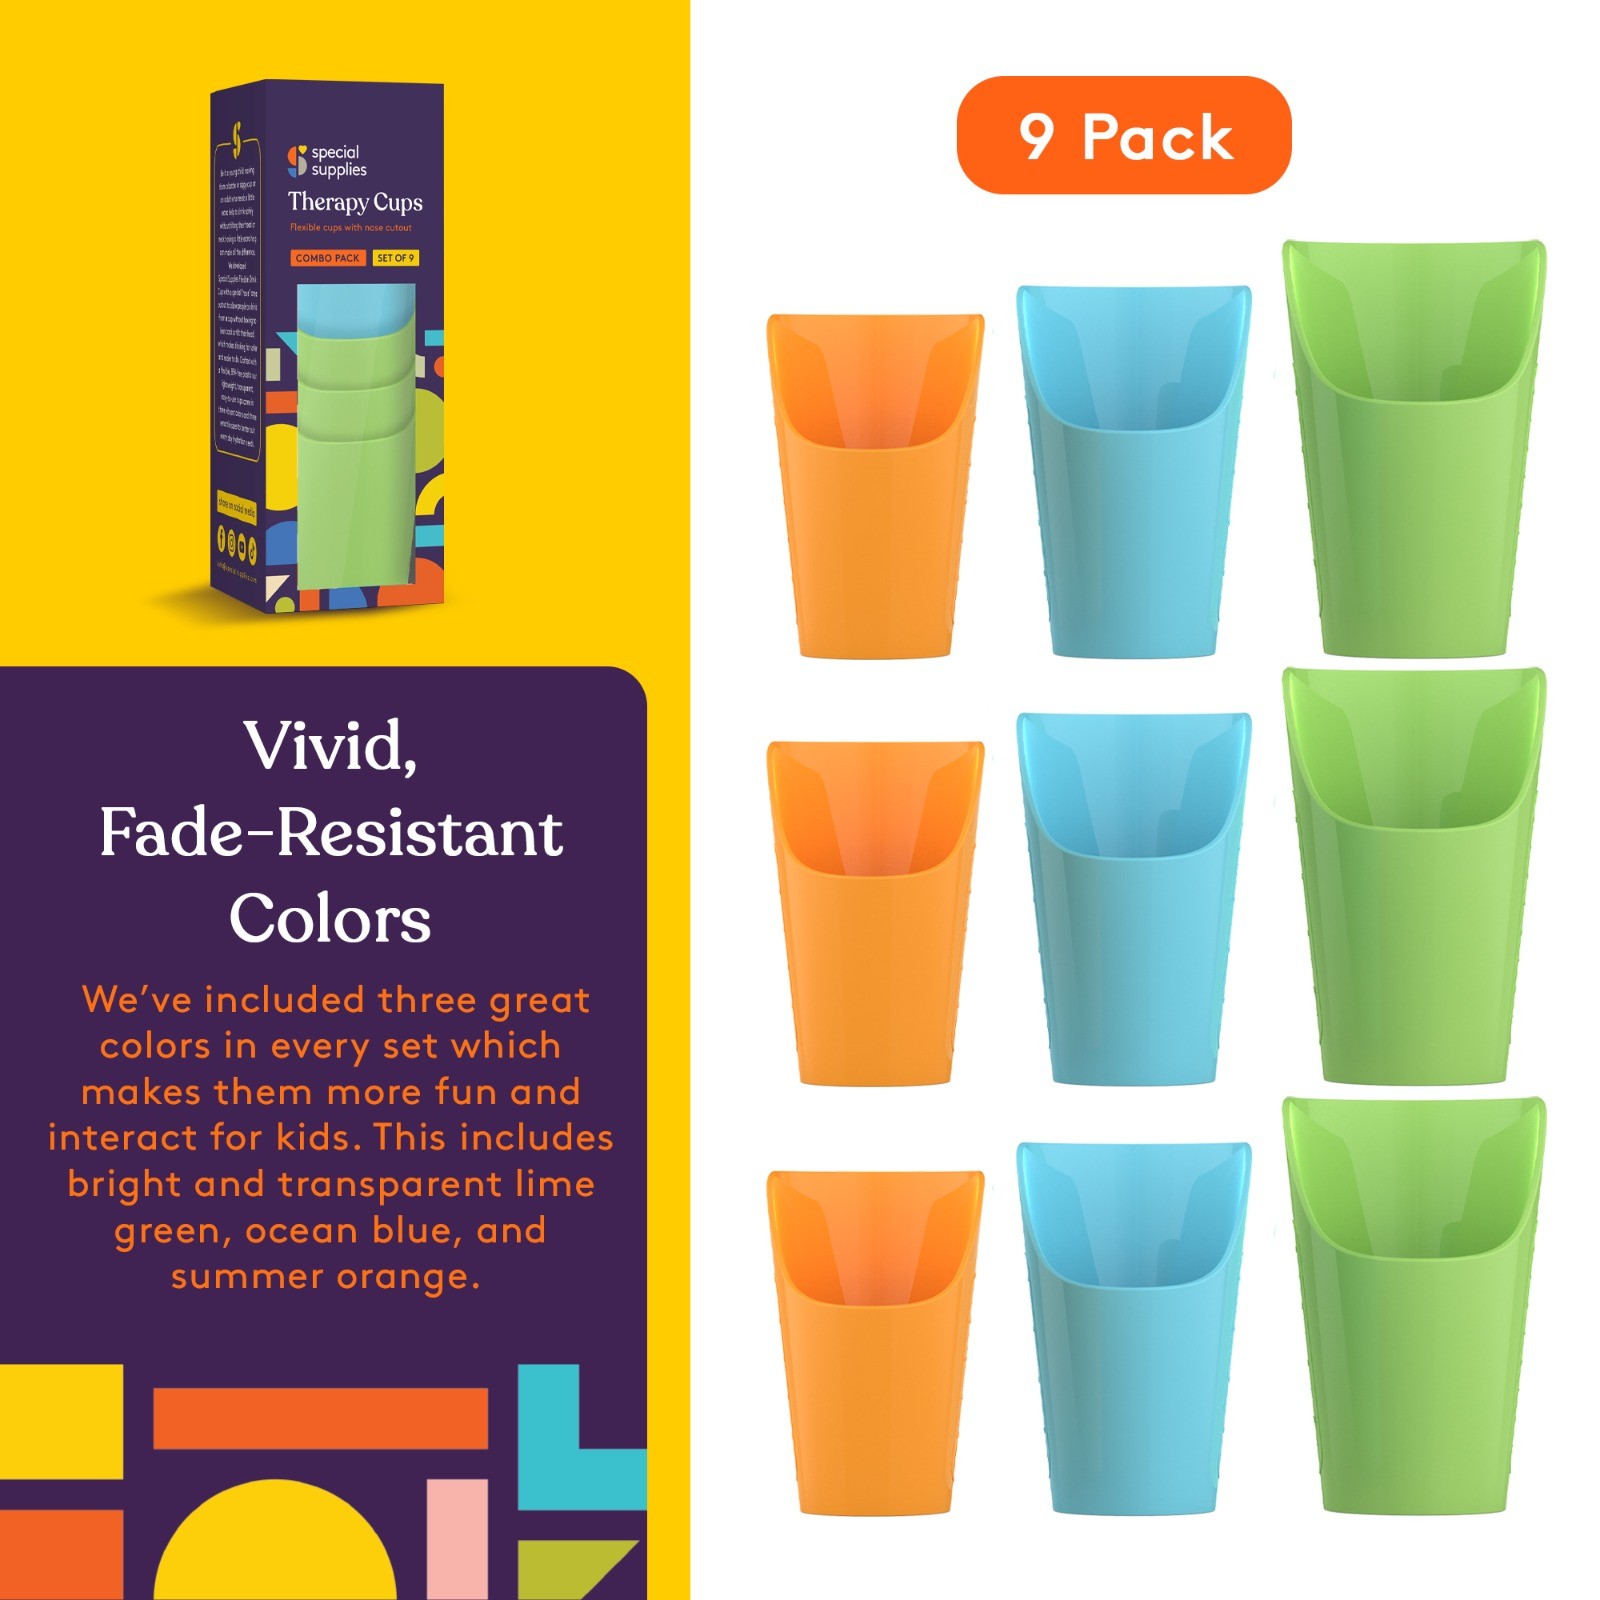 Combo Pack of 9 Flexible Drinking Cups with Nose Mold Cutout, 9 Pc